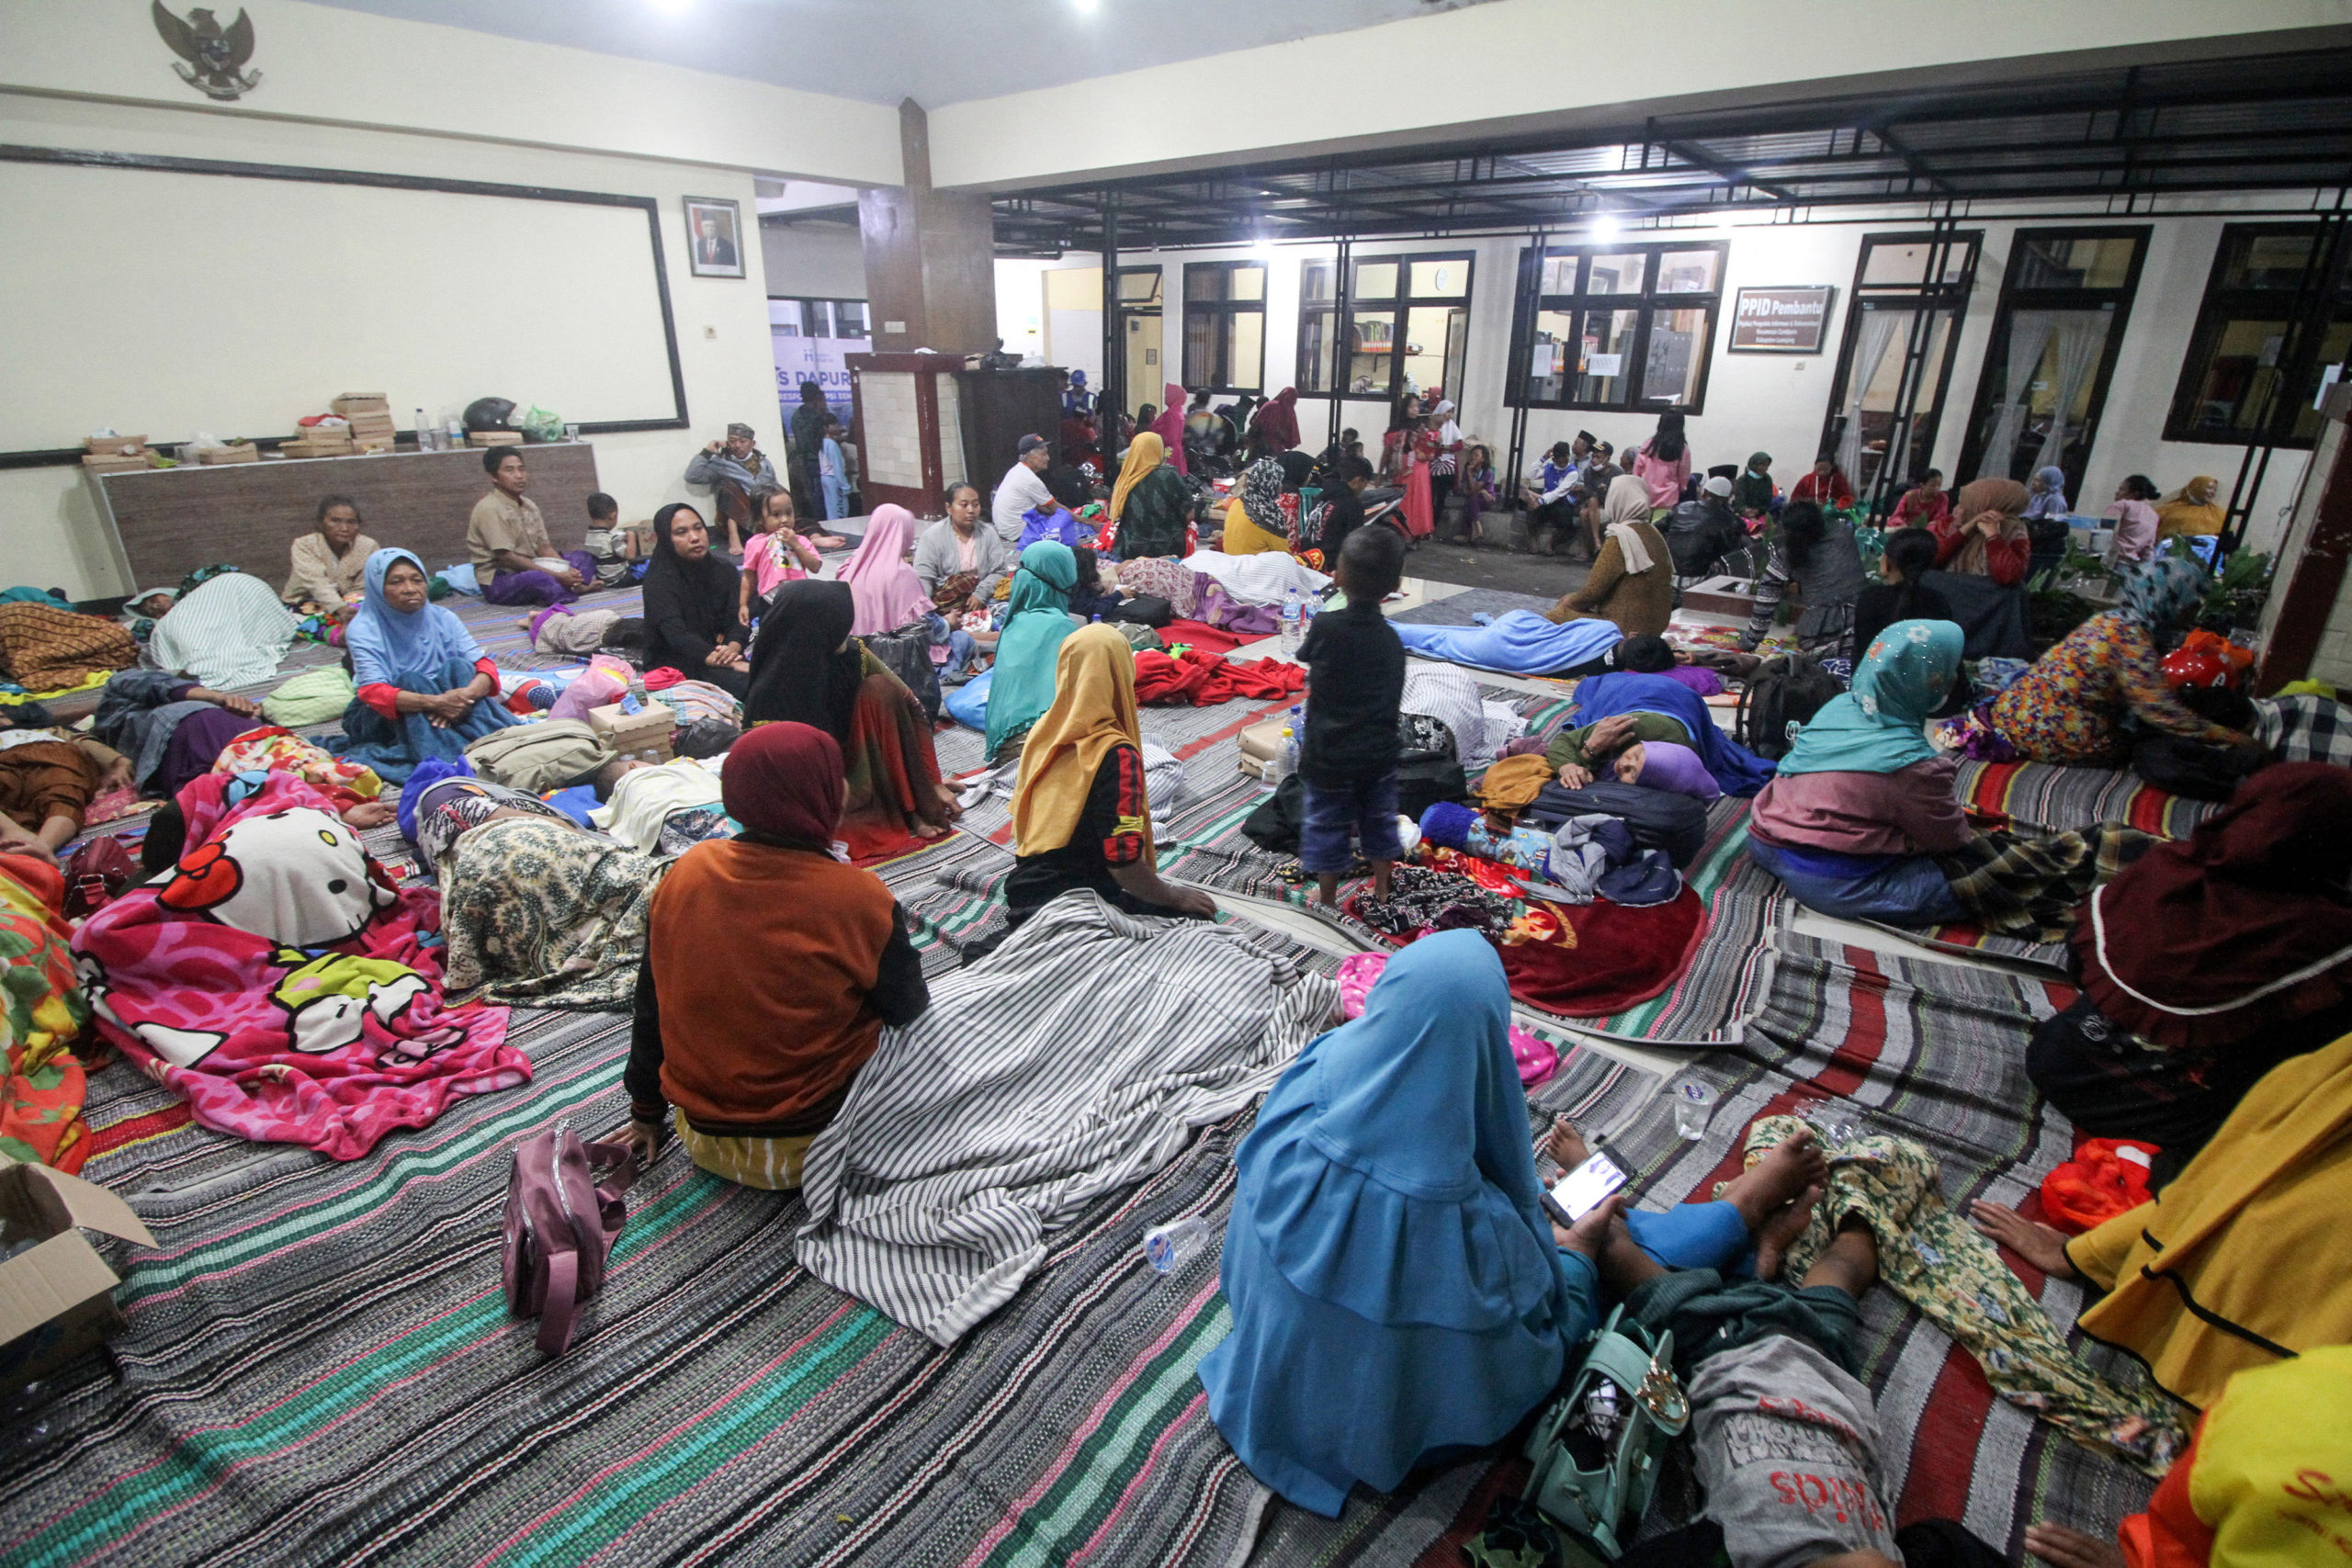 Villagers rest as they shelter at a district office after being evacuated following the eruption of Mount Semeru volcano in Lumajang, East Java province, Indonesia, December 4, 2022, in this photo taken by Antara Foto. Antara Foto/Umarul Faruq/ via REUTERS